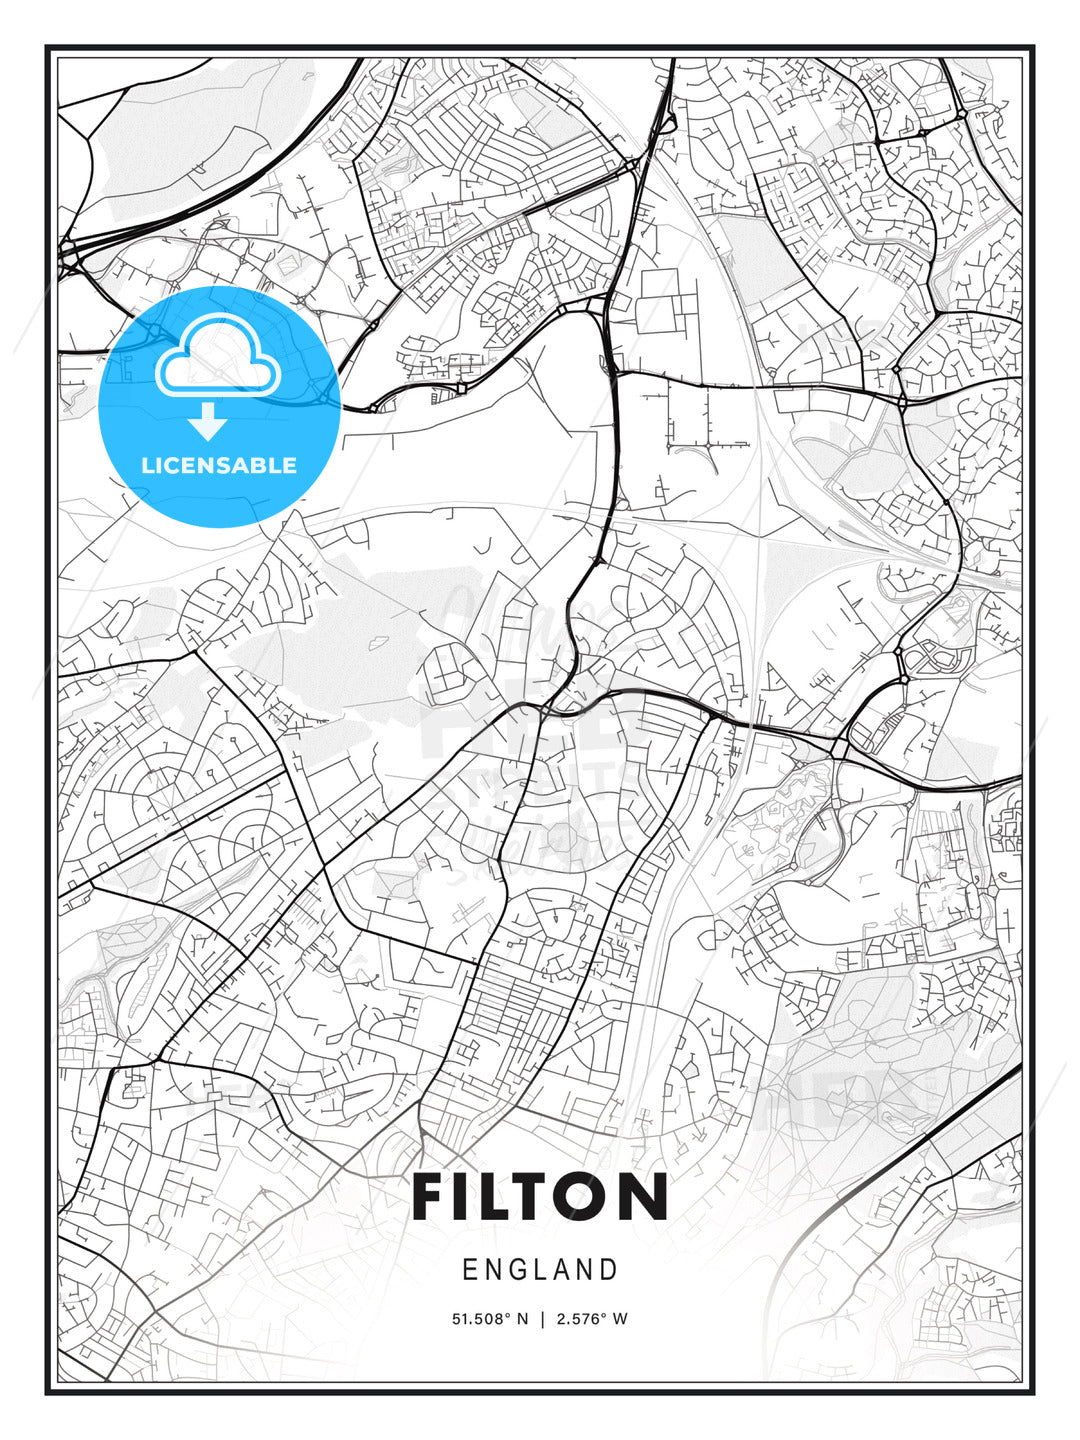 Filton, England, Modern Print Template in Various Formats - HEBSTREITS Sketches